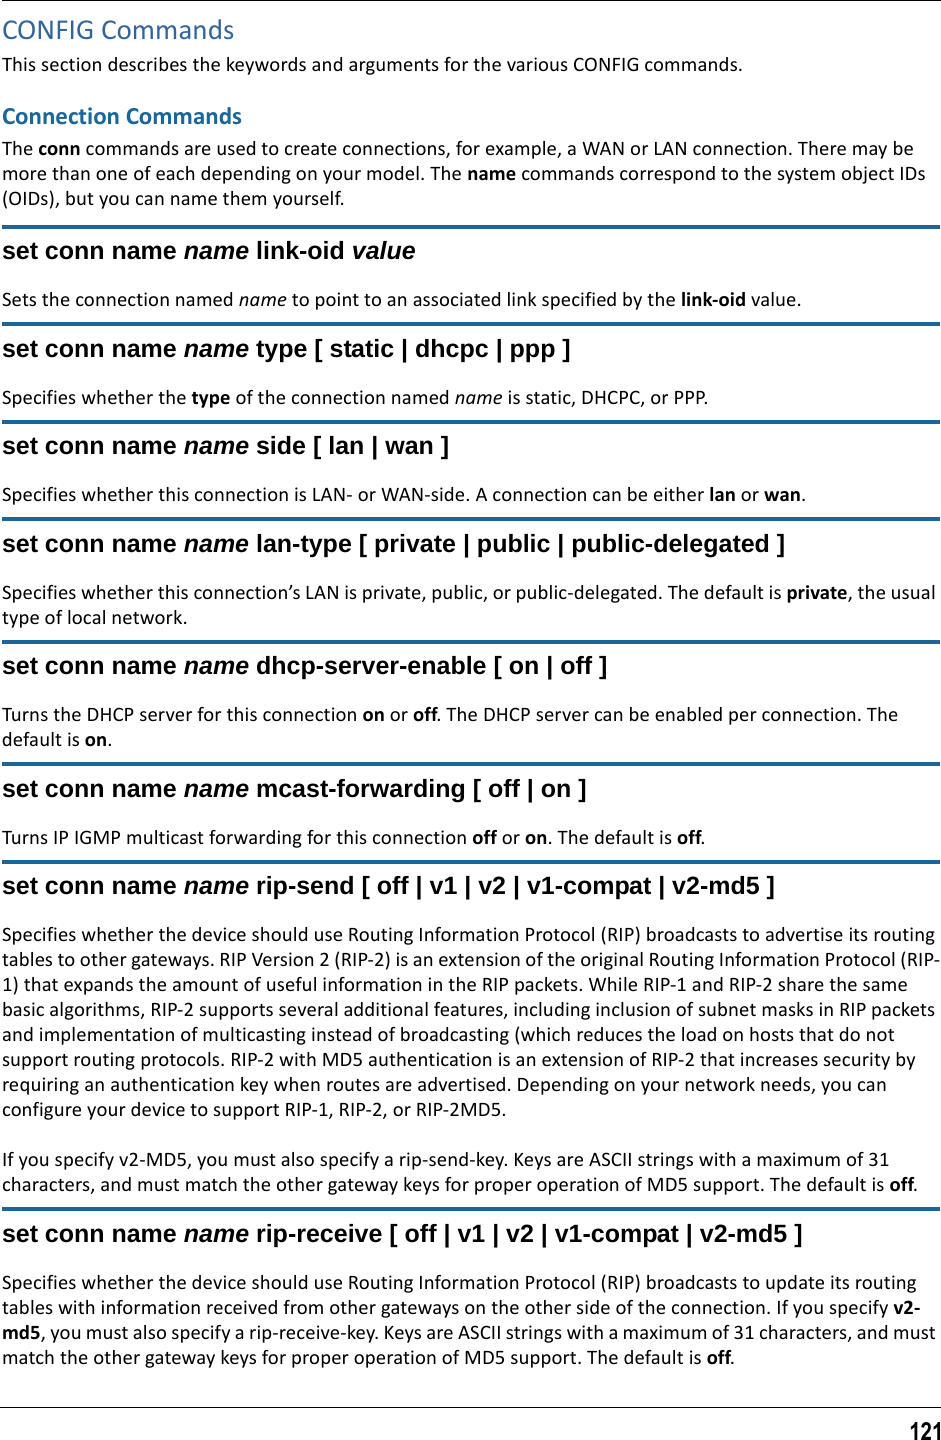 121CONFIG CommandsThis section describes the keywords and arguments for the various CONFIG commands.Connection CommandsThe conn commands are used to create connections, for example, a WAN or LAN connection. There may be more than one of each depending on your model. The name commands correspond to the system object IDs (OIDs), but you can name them yourself.set conn name name link-oid valueSets the connection named name to point to an associated link specified by the link-oid value.set conn name name type [ static | dhcpc | ppp ]Specifies whether the type of the connection named name is static, DHCPC, or PPP. set conn name name side [ lan | wan ]Specifies whether this connection is LAN- or WAN-side. A connection can be either lan or wan.set conn name name lan-type [ private | public | public-delegated ]Specifies whether this connection’s LAN is private, public, or public-delegated. The default is private, the usual type of local network.set conn name name dhcp-server-enable [ on | off ]Turns the DHCP server for this connection on or off. The DHCP server can be enabled per connection. The default is on.set conn name name mcast-forwarding [ off | on ]Turns IP IGMP multicast forwarding for this connection off or on. The default is off.set conn name name rip-send [ off | v1 | v2 | v1-compat | v2-md5 ]Specifies whether the device should use Routing Information Protocol (RIP) broadcasts to advertise its routing tables to other gateways. RIP Version 2 (RIP-2) is an extension of the original Routing Information Protocol (RIP-1) that expands the amount of useful information in the RIP packets. While RIP-1 and RIP-2 share the same basic algorithms, RIP-2 supports several additional features, including inclusion of subnet masks in RIP packets and implementation of multicasting instead of broadcasting (which reduces the load on hosts that do not support routing protocols. RIP-2 with MD5 authentication is an extension of RIP-2 that increases security by requiring an authentication key when routes are advertised. Depending on your network needs, you can configure your device to support RIP-1, RIP-2, or RIP-2MD5.If you specify v2-MD5, you must also specify a rip-send-key. Keys are ASCII strings with a maximum of 31 characters, and must match the other gateway keys for proper operation of MD5 support. The default is off.set conn name name rip-receive [ off | v1 | v2 | v1-compat | v2-md5 ]Specifies whether the device should use Routing Information Protocol (RIP) broadcasts to update its routing tables with information received from other gateways on the other side of the connection. If you specify v2-md5, you must also specify a rip-receive-key. Keys are ASCII strings with a maximum of 31 characters, and must match the other gateway keys for proper operation of MD5 support. The default is off.